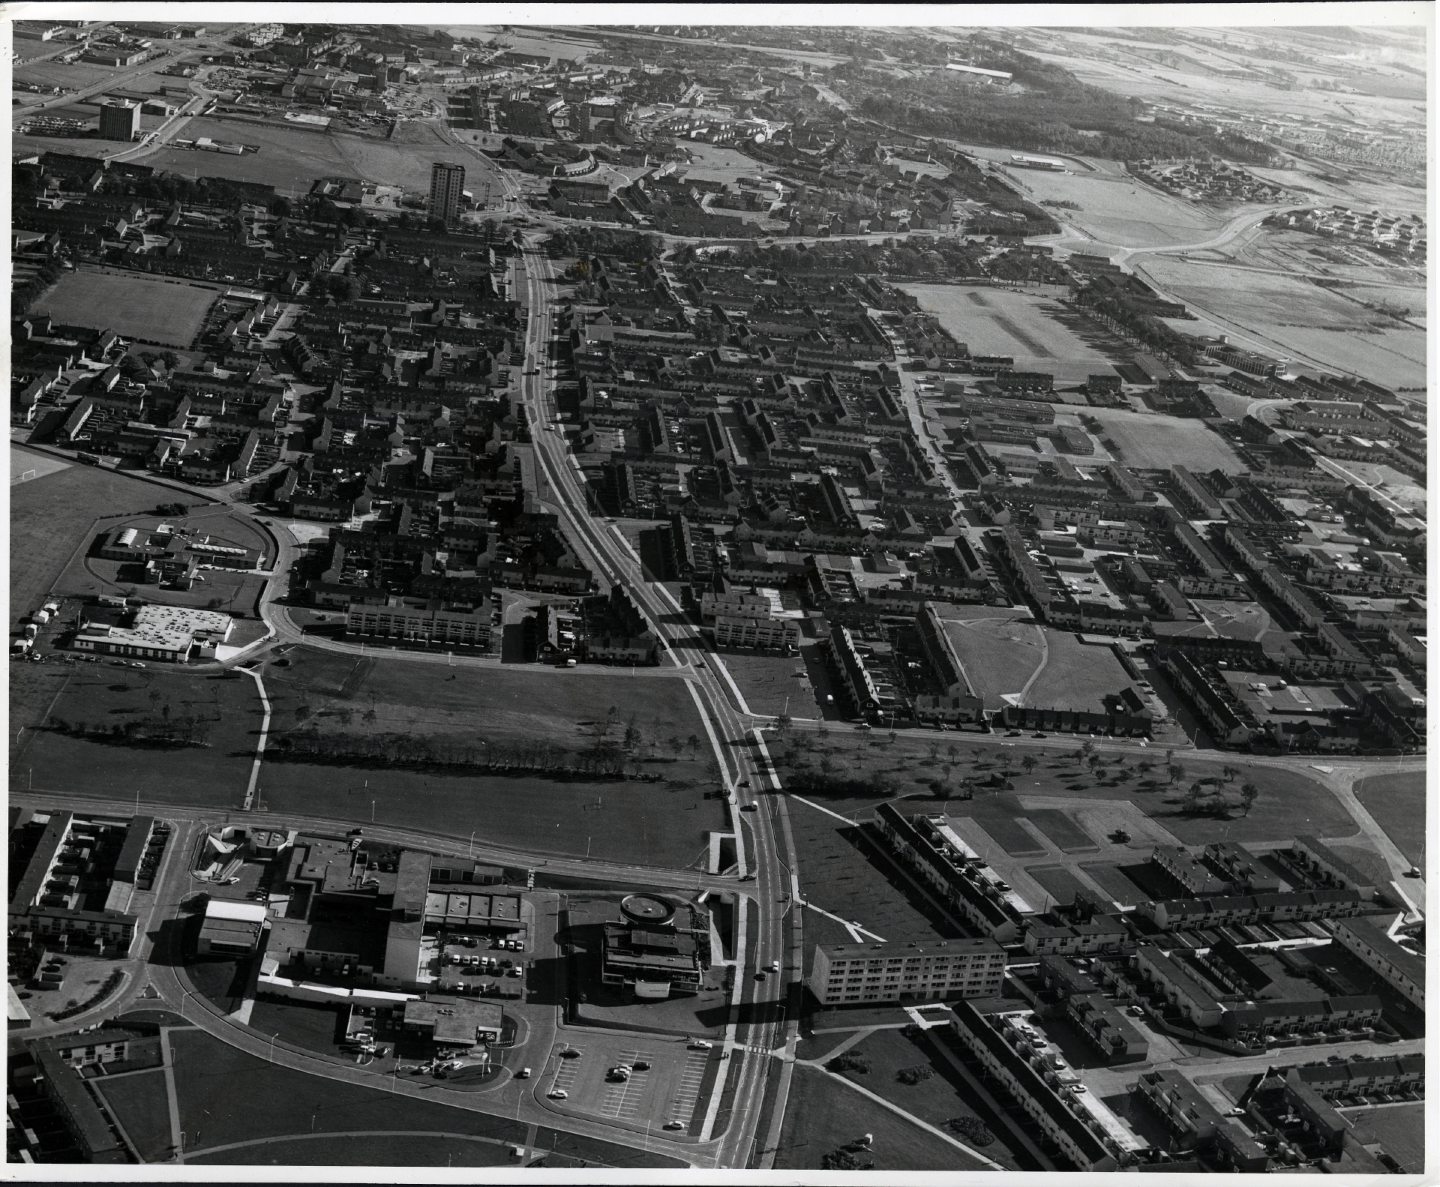 Glenrothes from above, with Raeburn Heights in the distance, in the 1970s.